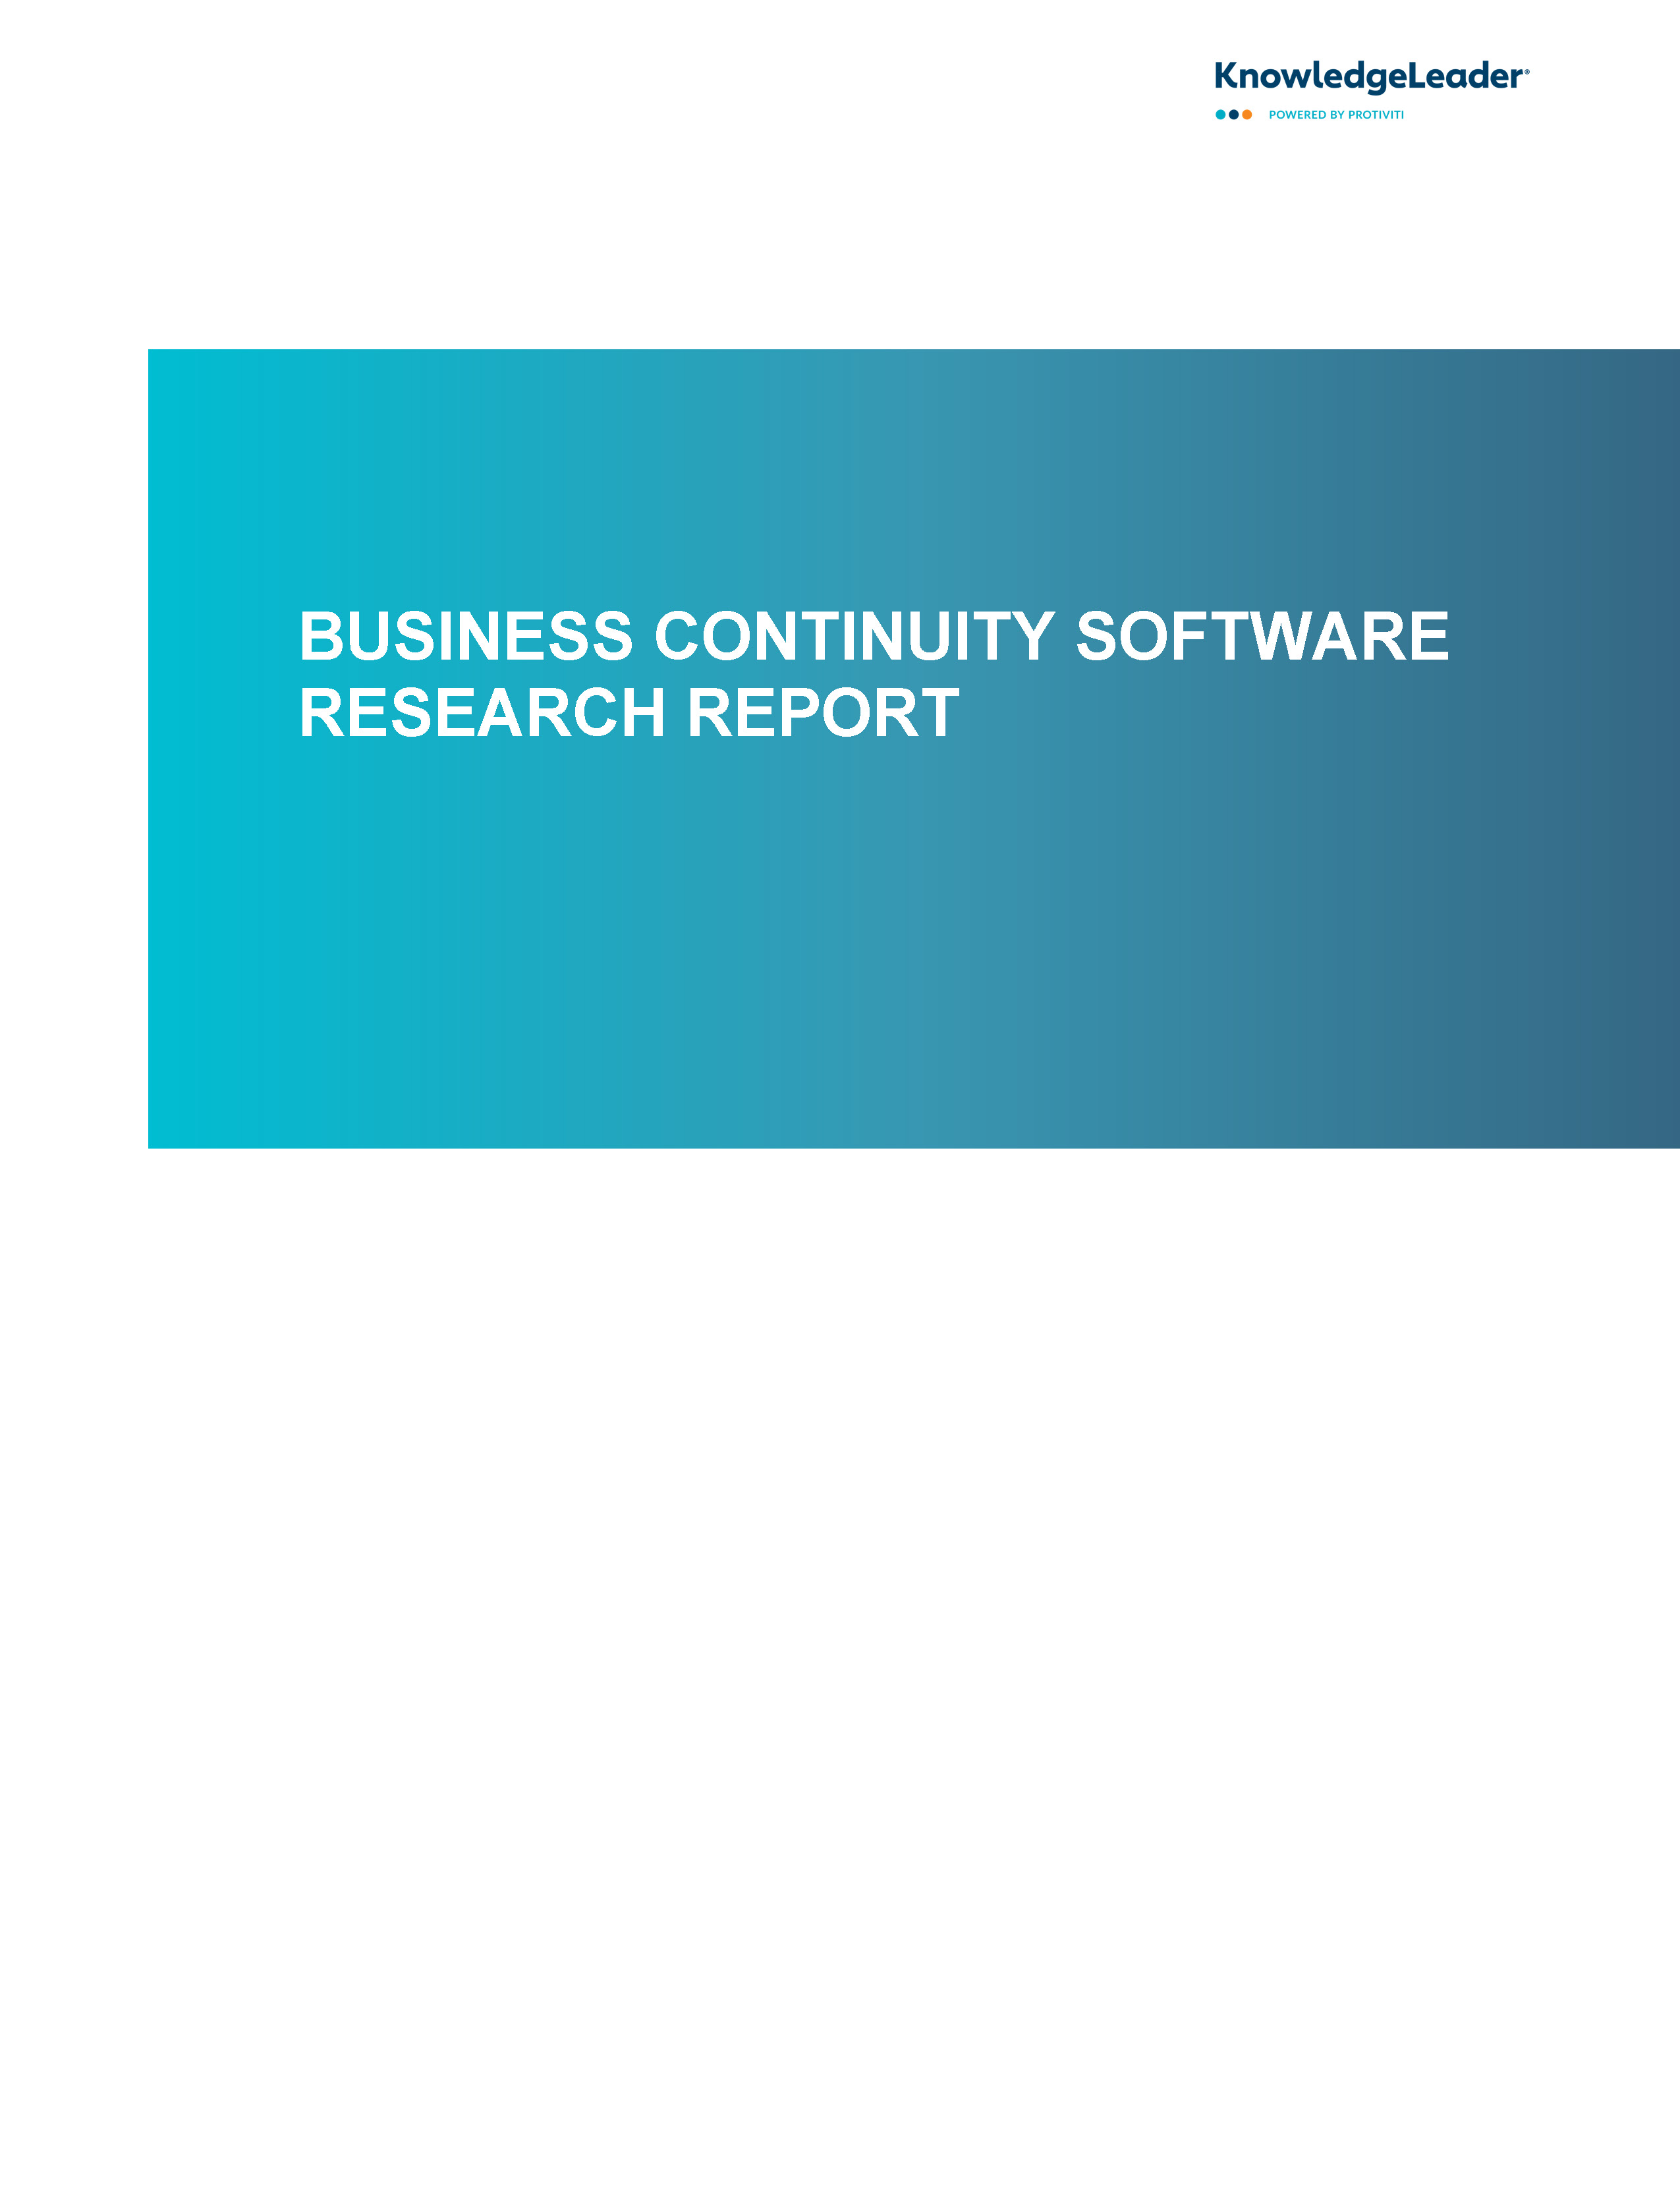 Screenshot of the first page of Business Continuity Software Research Report